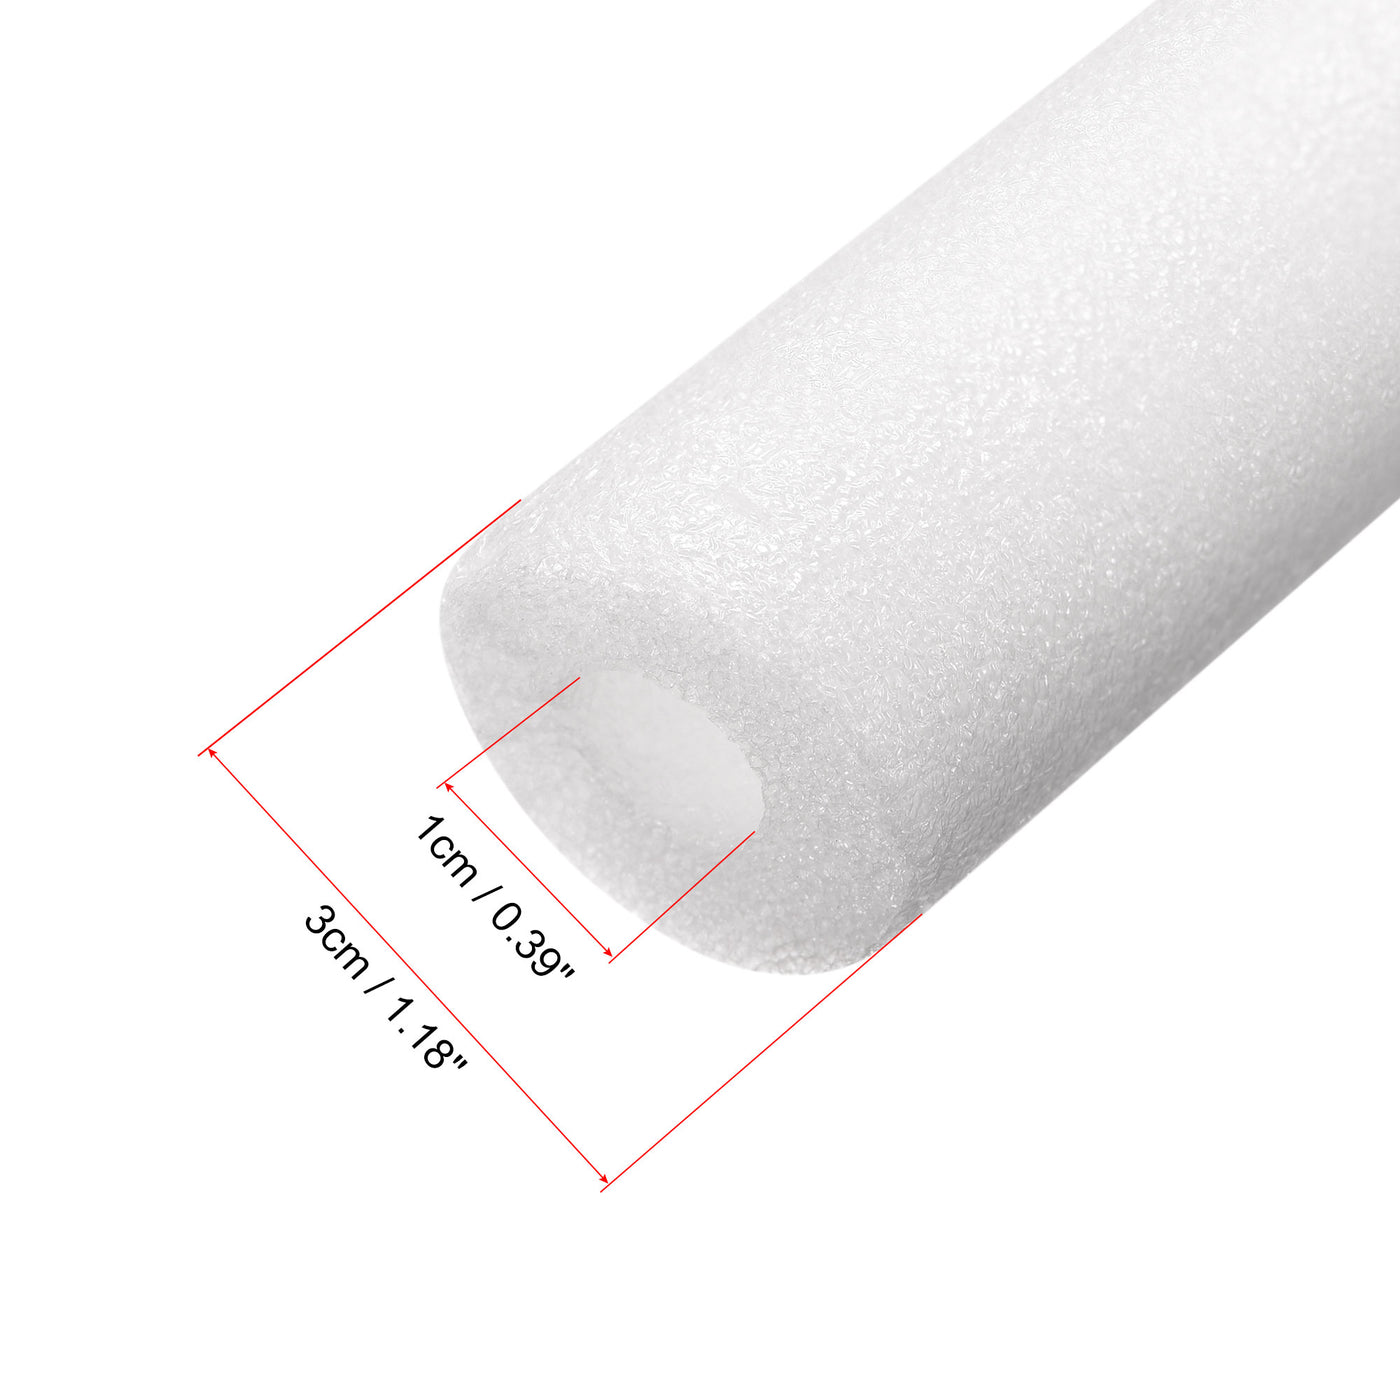 uxcell Uxcell Foam Tube for Protecting Pipes and Heat Preservation Pipe Insulation Kit